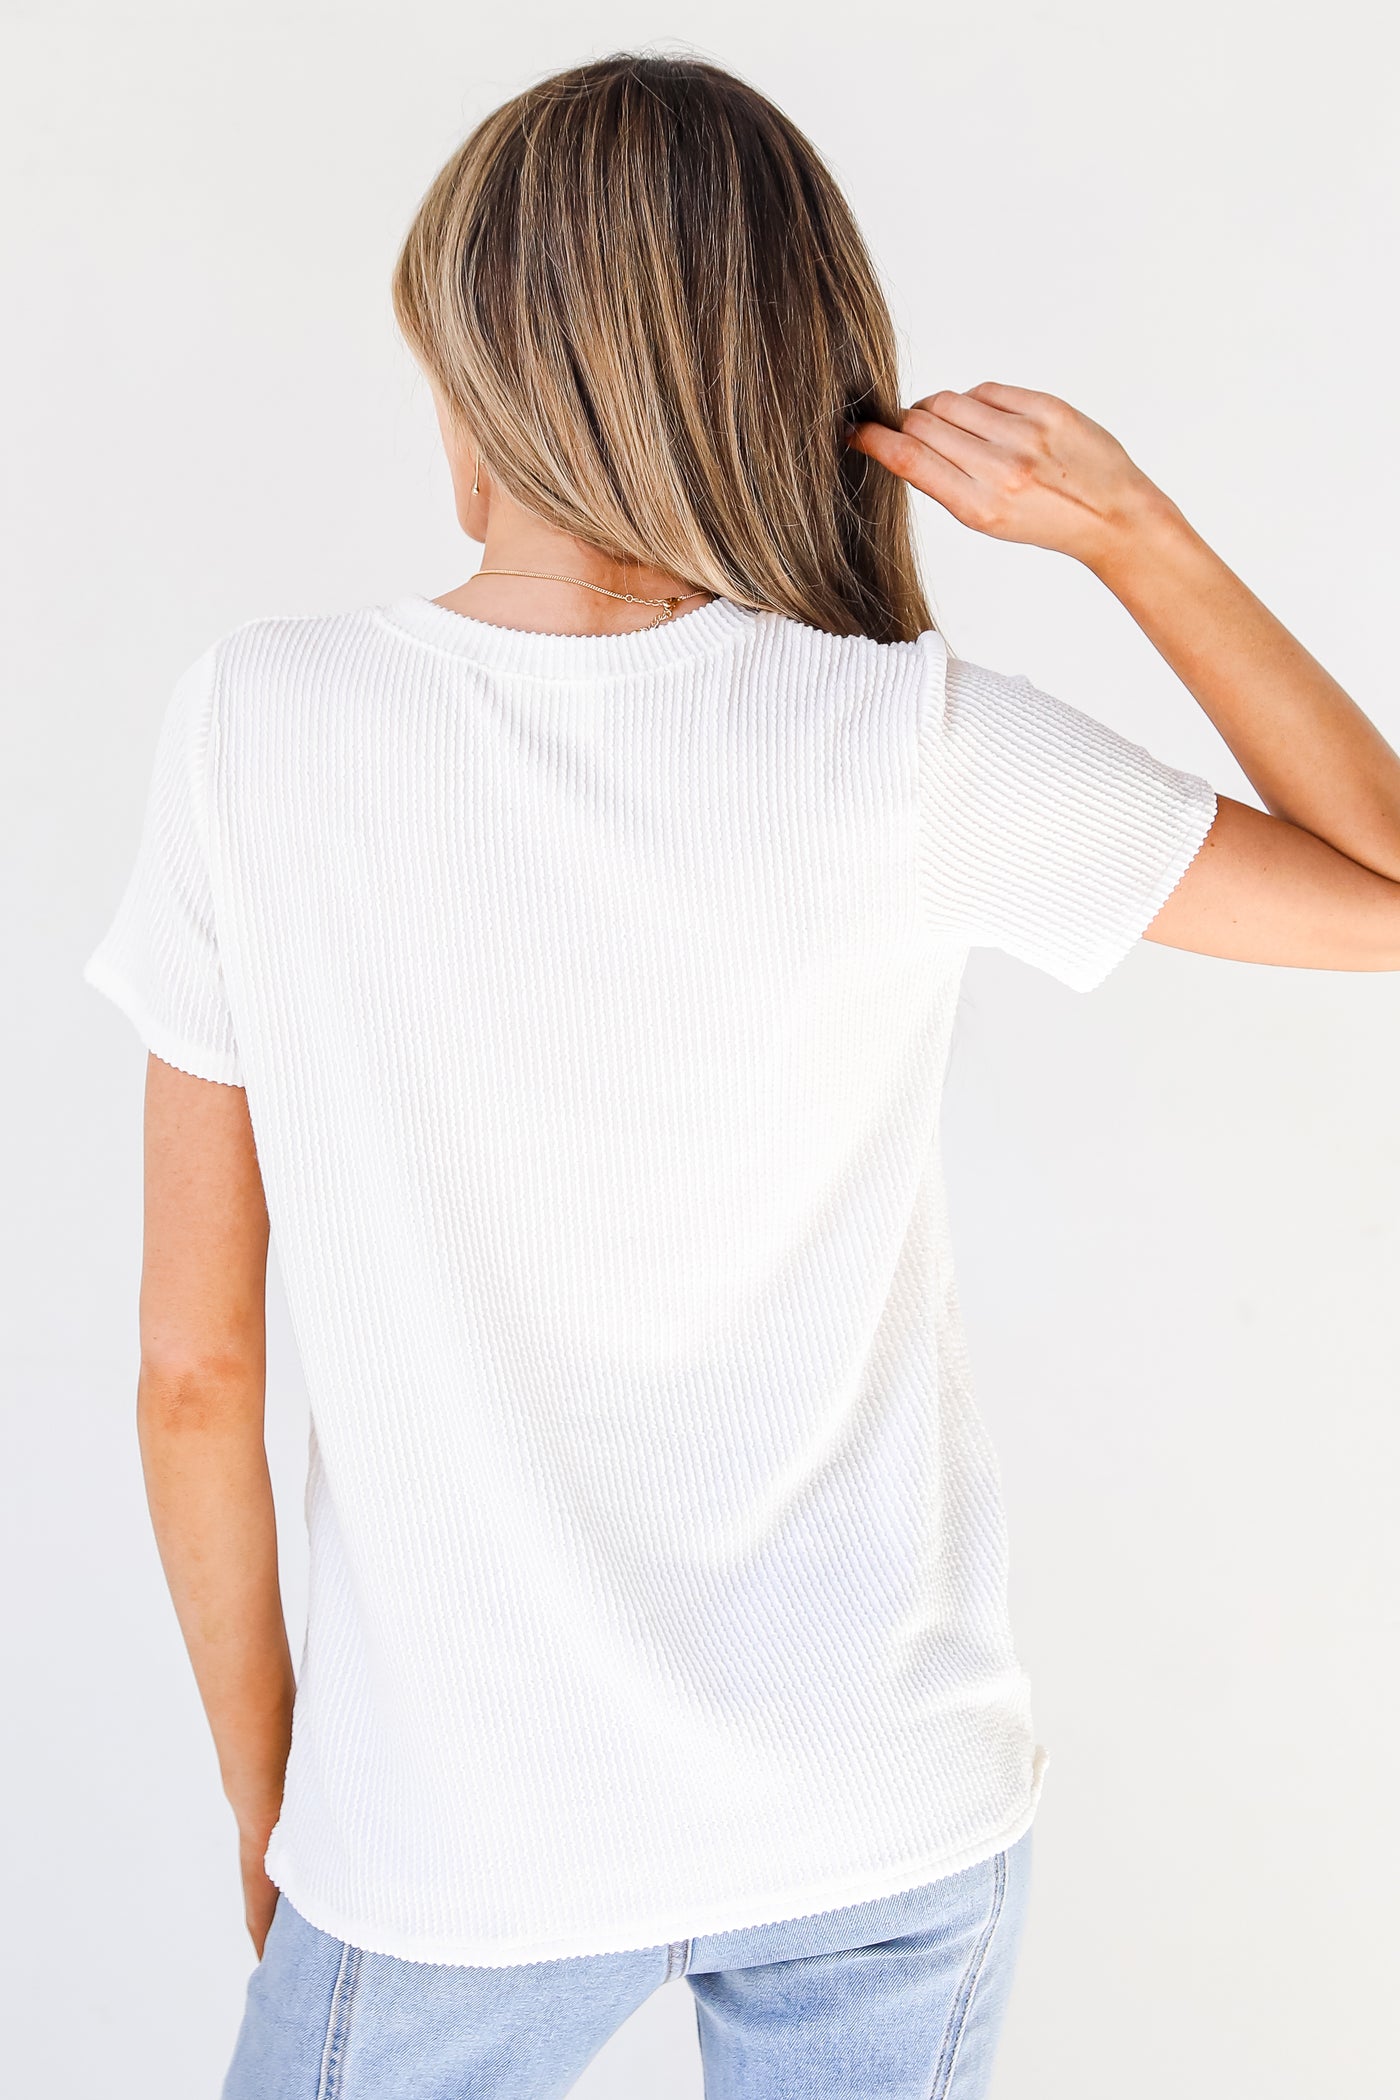 white Corded Tee back view